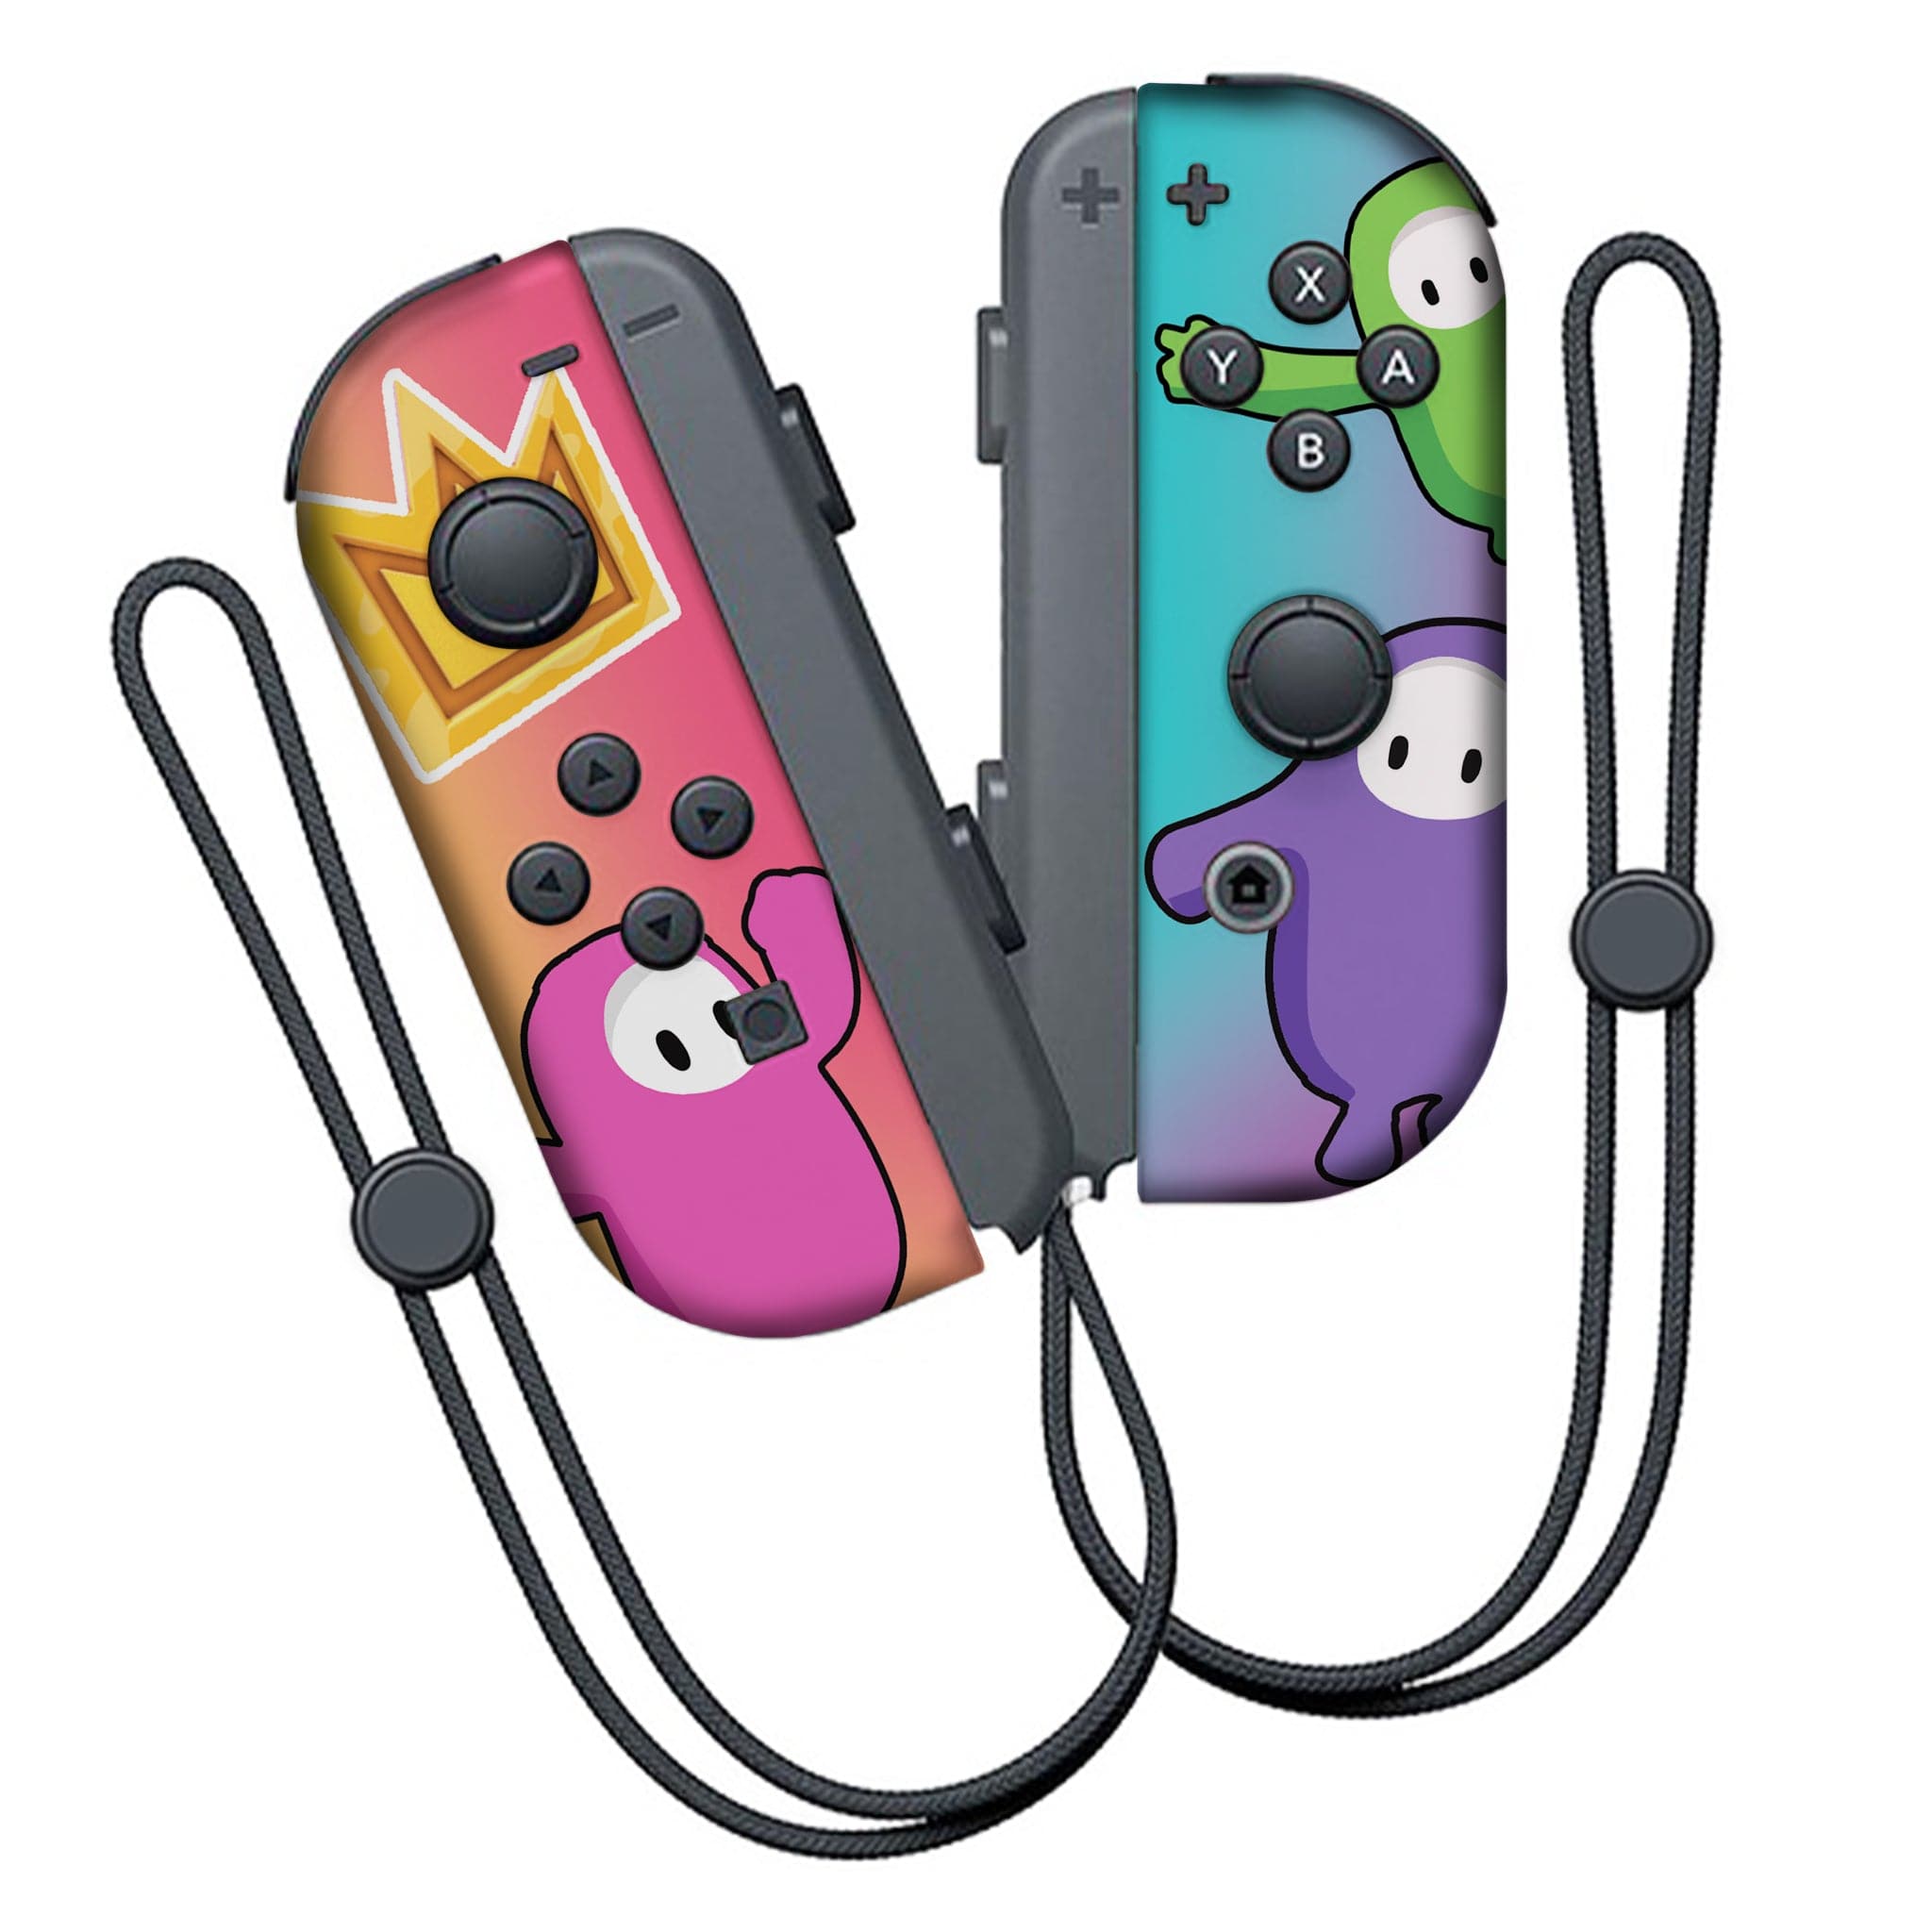 Fall Guys Inspired Nintendo Switch Joy Con (L/R) Controllers